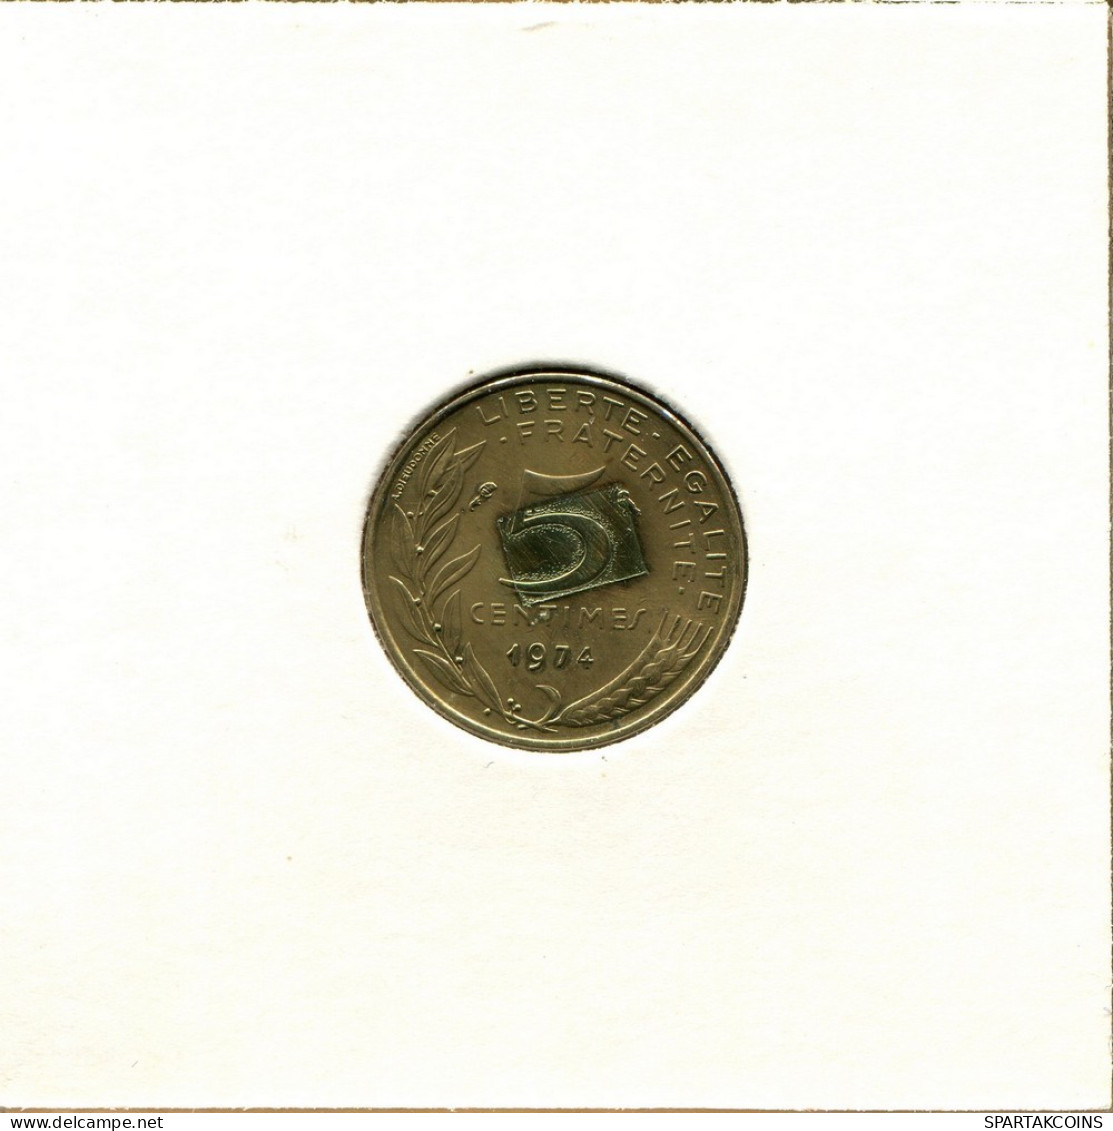 5 CENTIMES 1974 FRANCE Coin #BB415.U.A - 5 Centimes